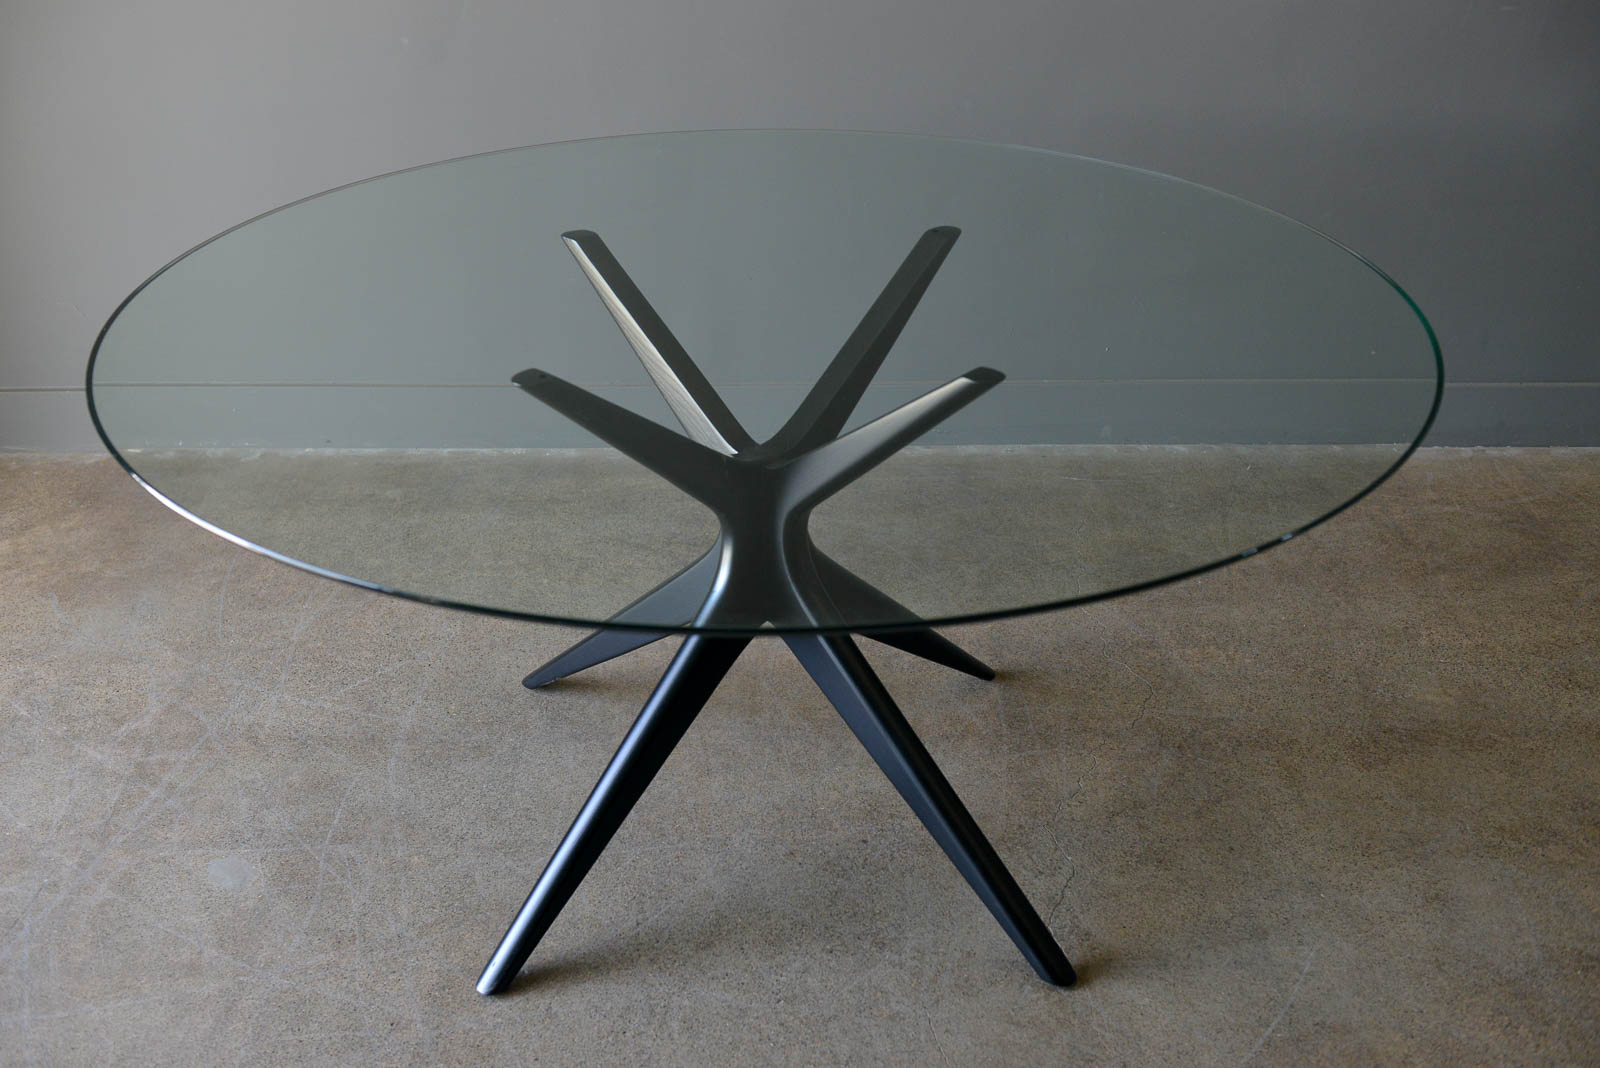 Sculpted Star Base Dining Table with Floating Glass Top, circa 1970 ...